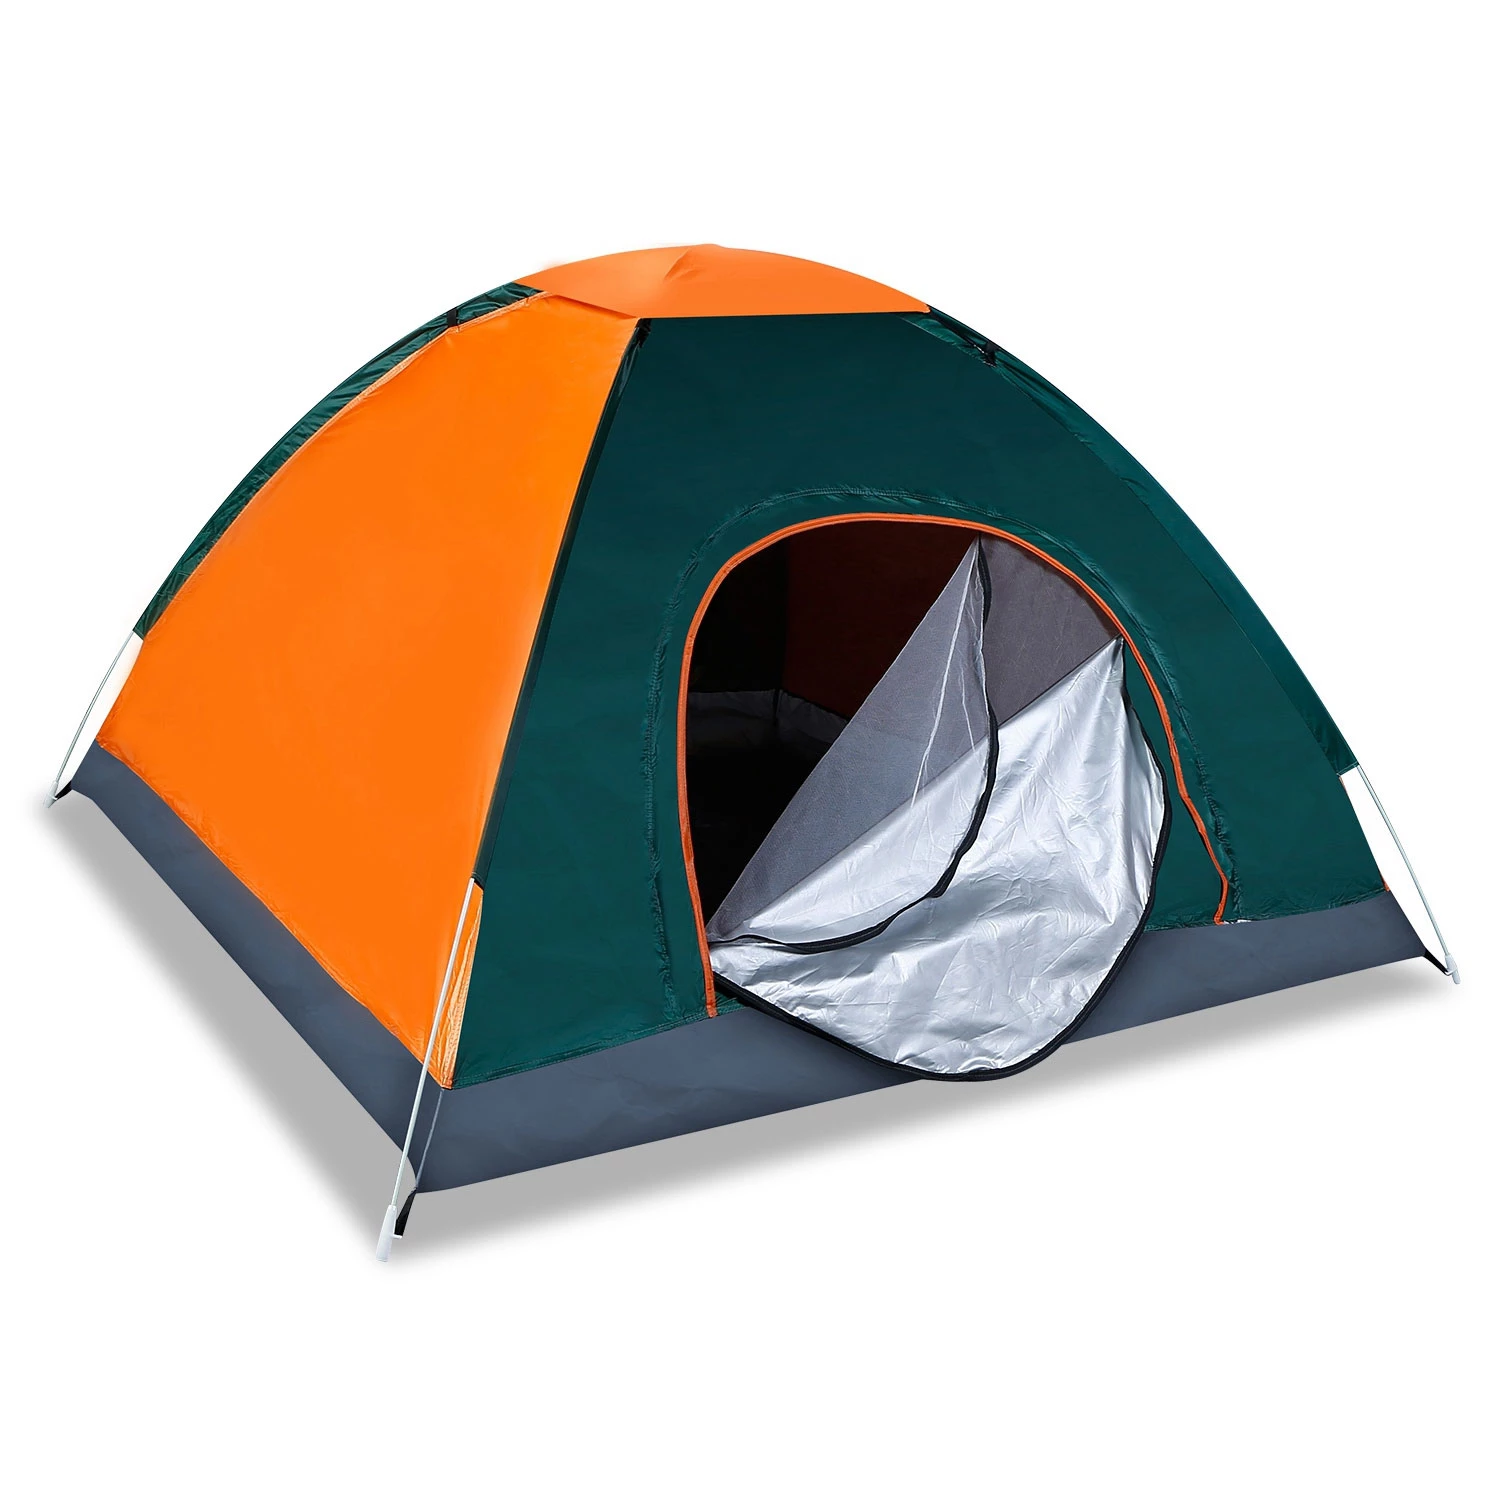 4 Persons Camping Waterproof Tent Pop Up Tent Instant Setup Tent w/2 Mosquito Net Doors Carrying Bag